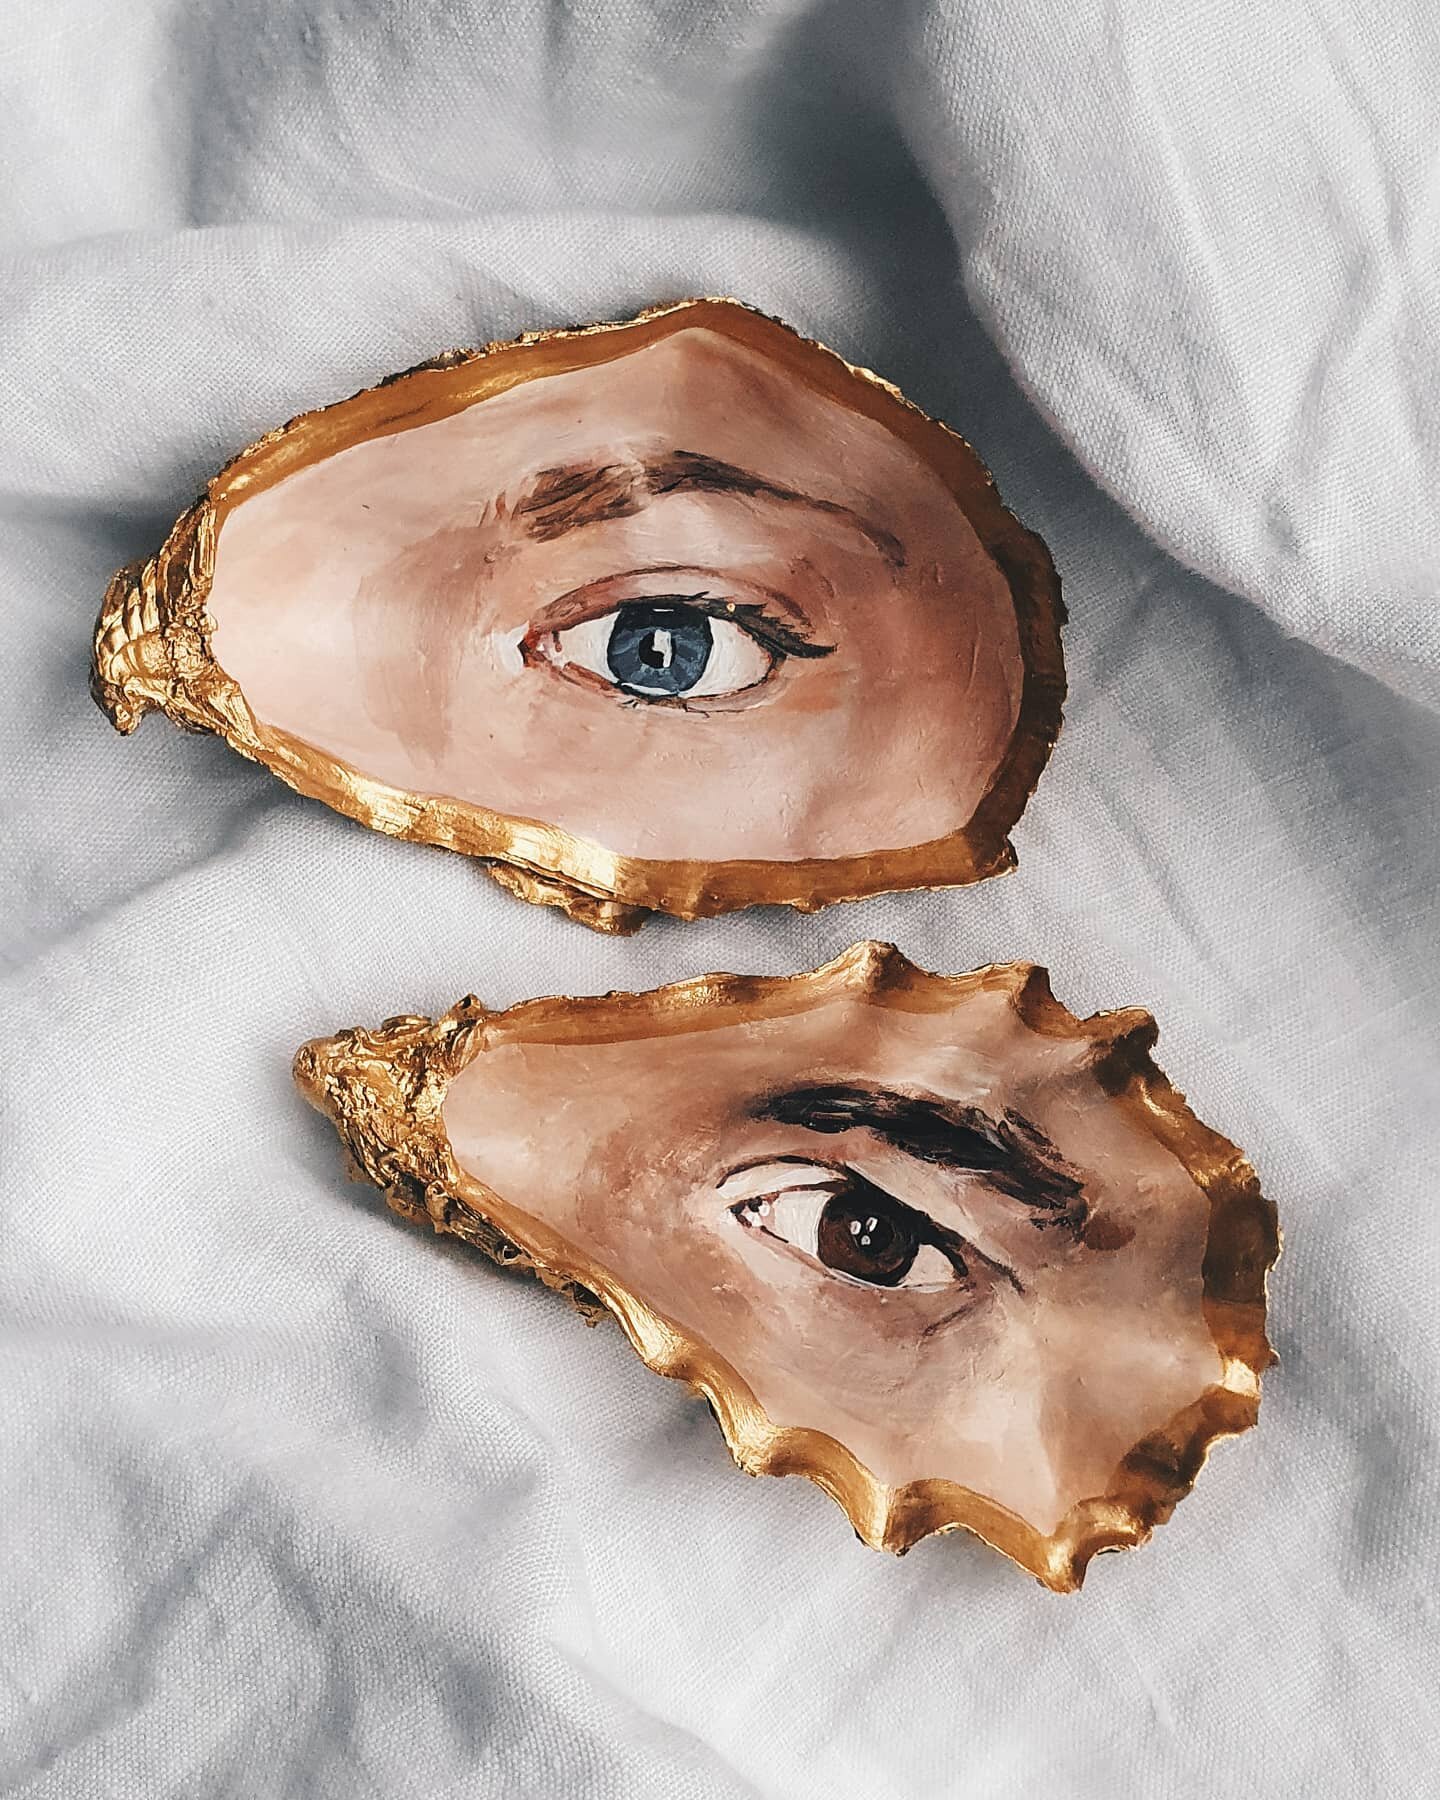 Lover's Gaze (acrylic on oyster shell) 🦪🦪 These mini portraits of my husband and I were inspired by a mysterious, and shortlived, trend in Victorian England of having the eye of you lover painted and made into jewellery. Pre-selfie, this must have 